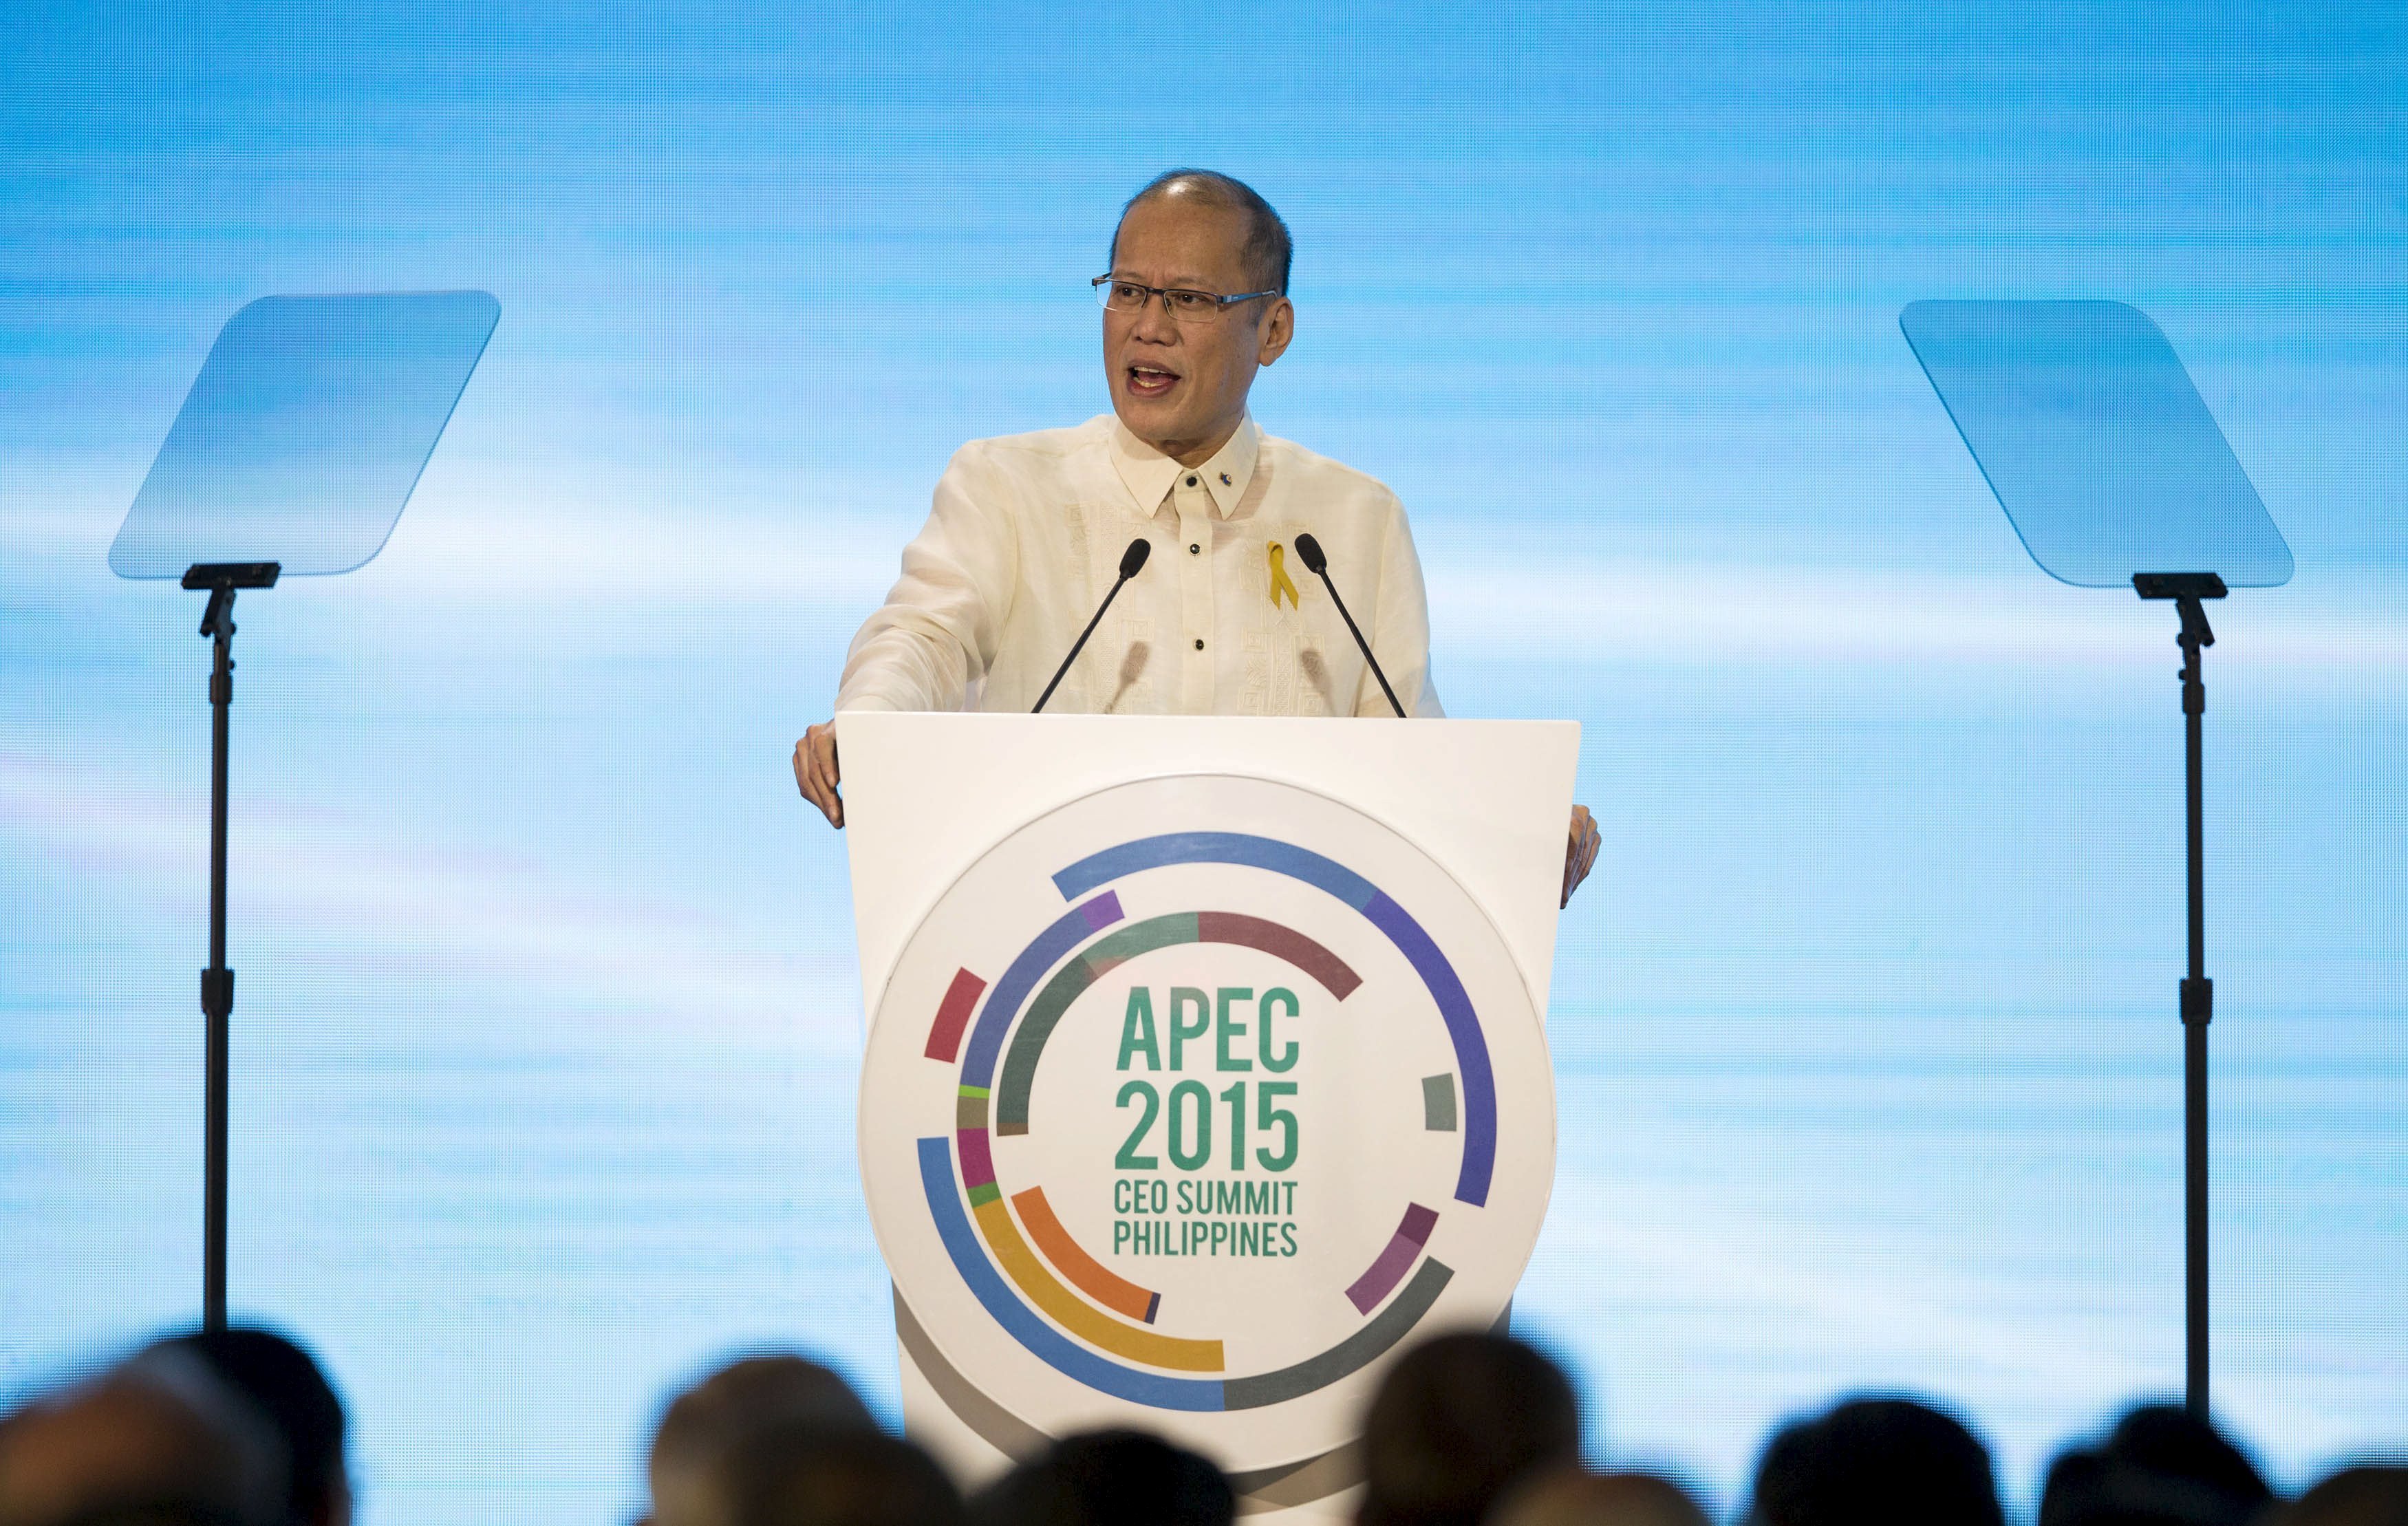 President Aquino has been described by commentators as a proponent of pluralism and minority rights. Photo: Ritchie B. Tongo/Pool Photo via Reuters